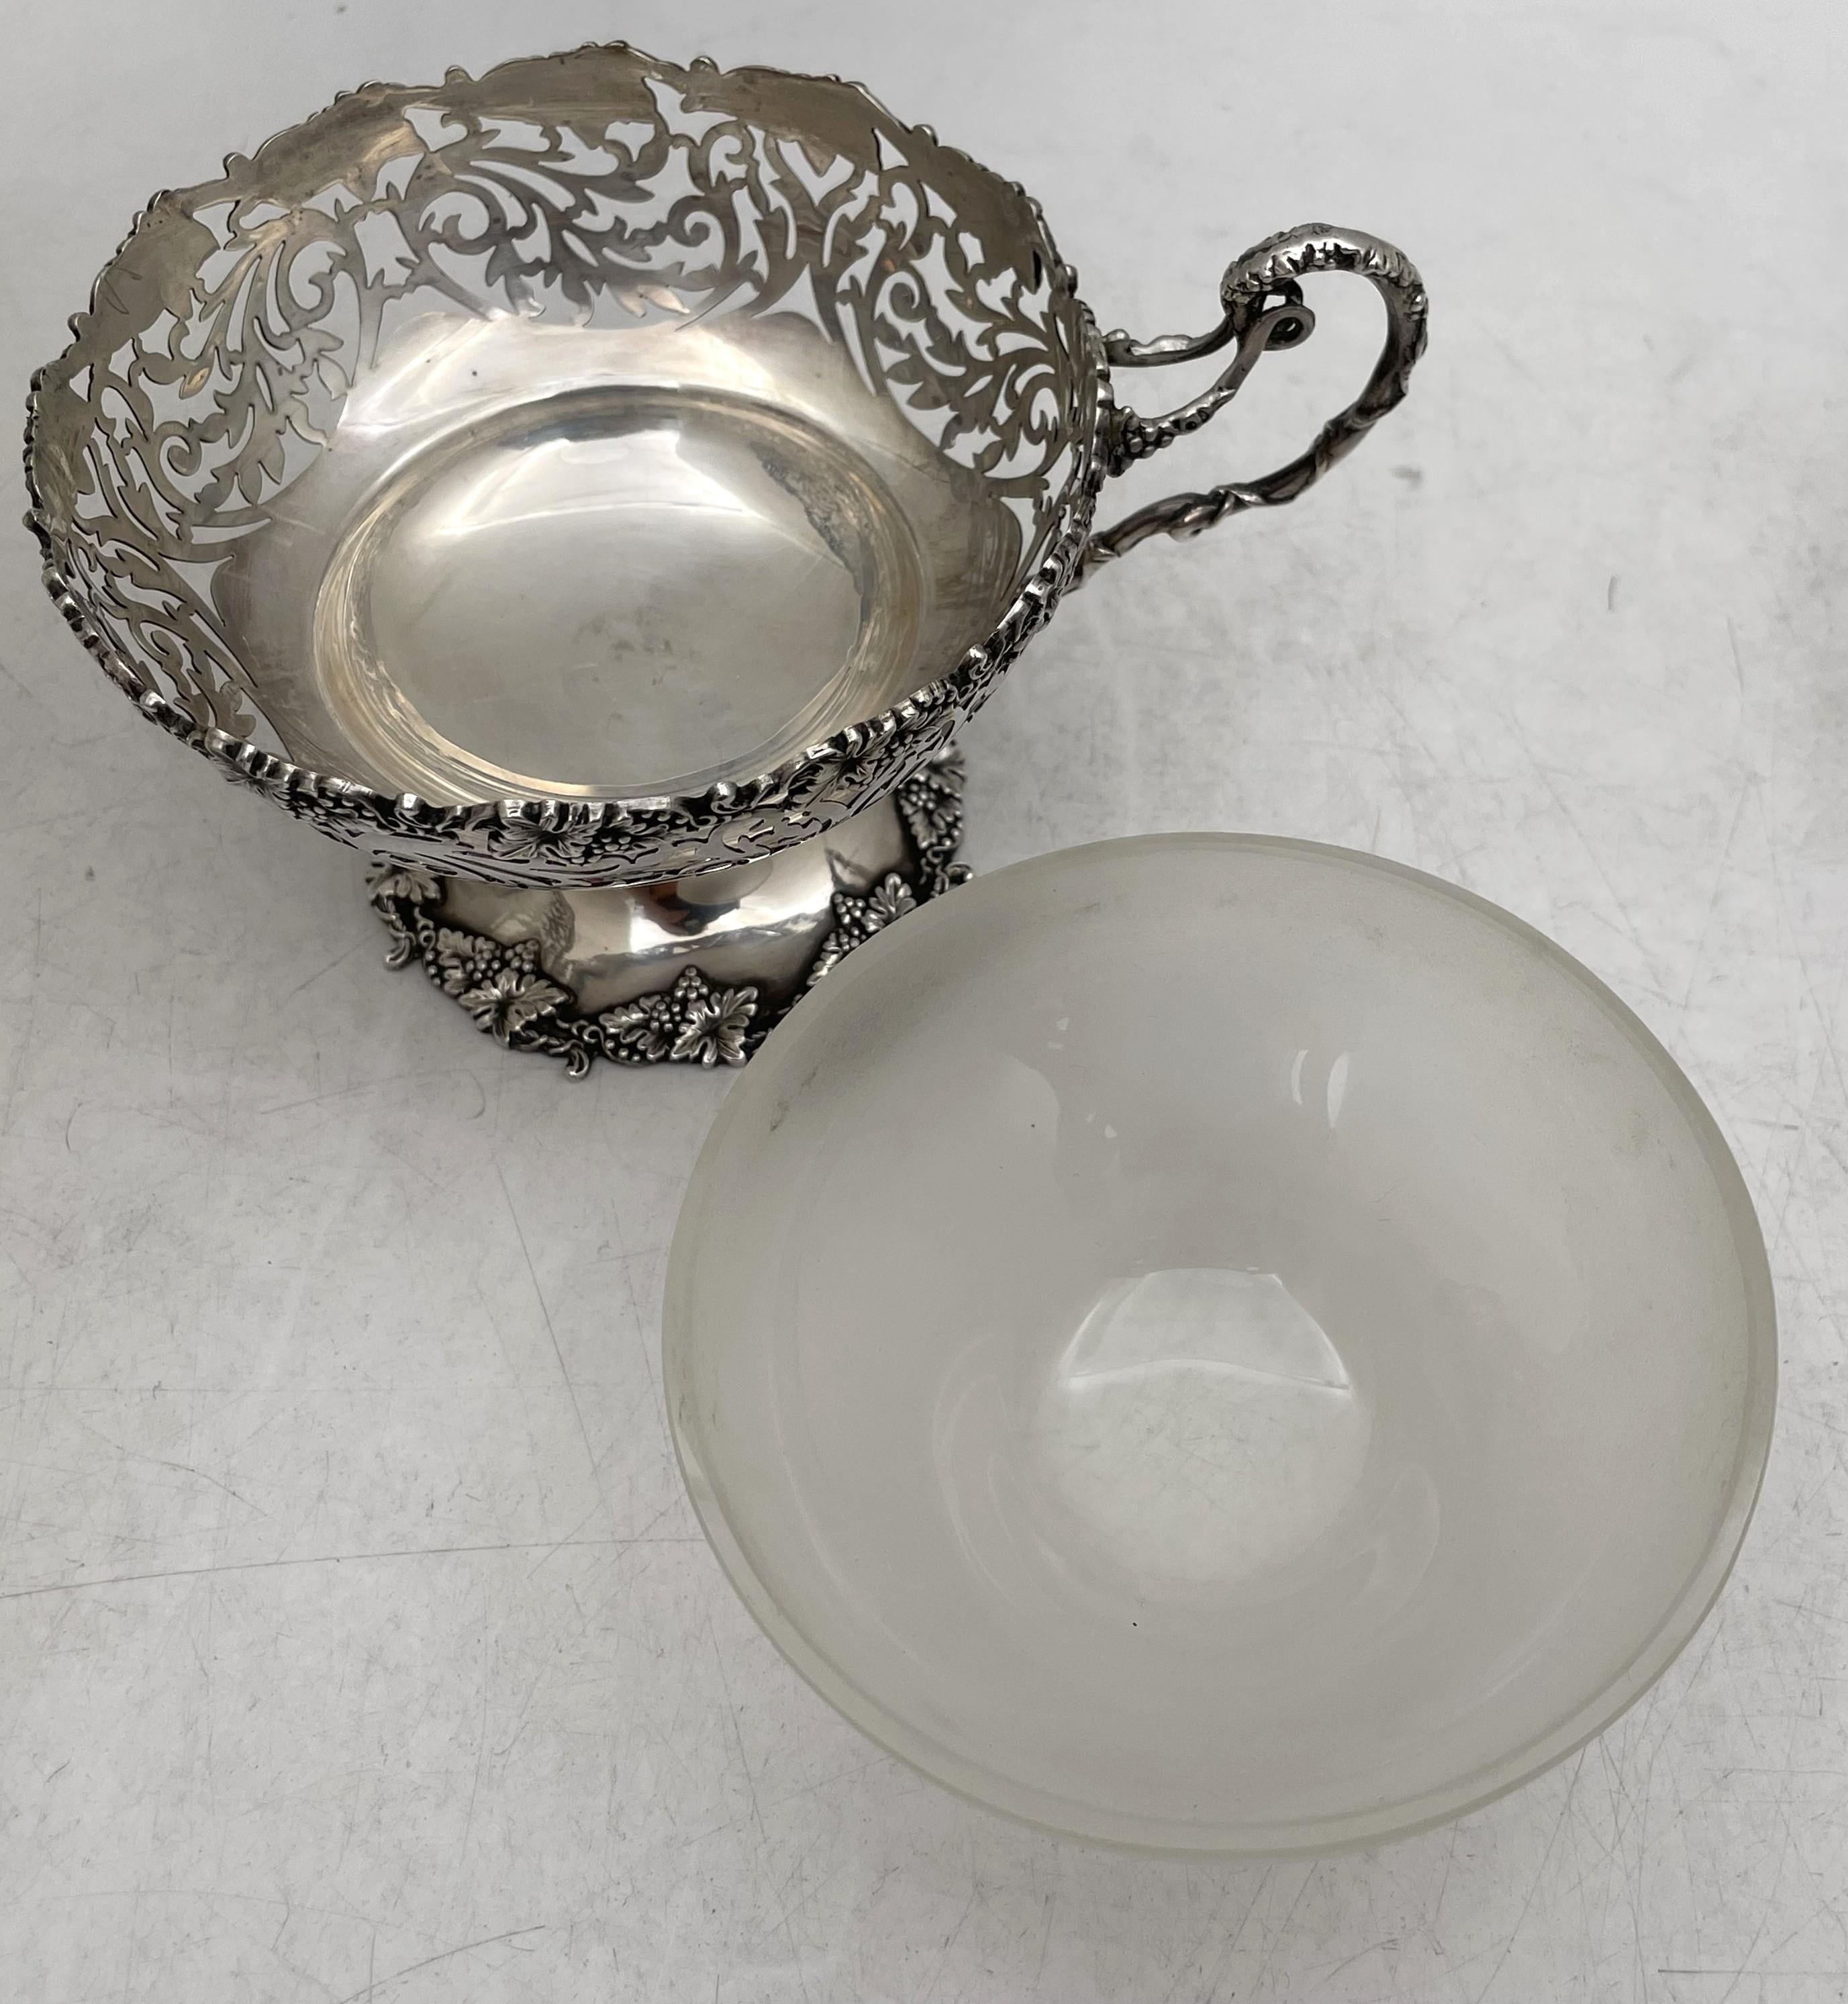 Walker & Hall English Sterling Silver & Glass 1930 Punch Bowl Set with 4 Cups For Sale 7